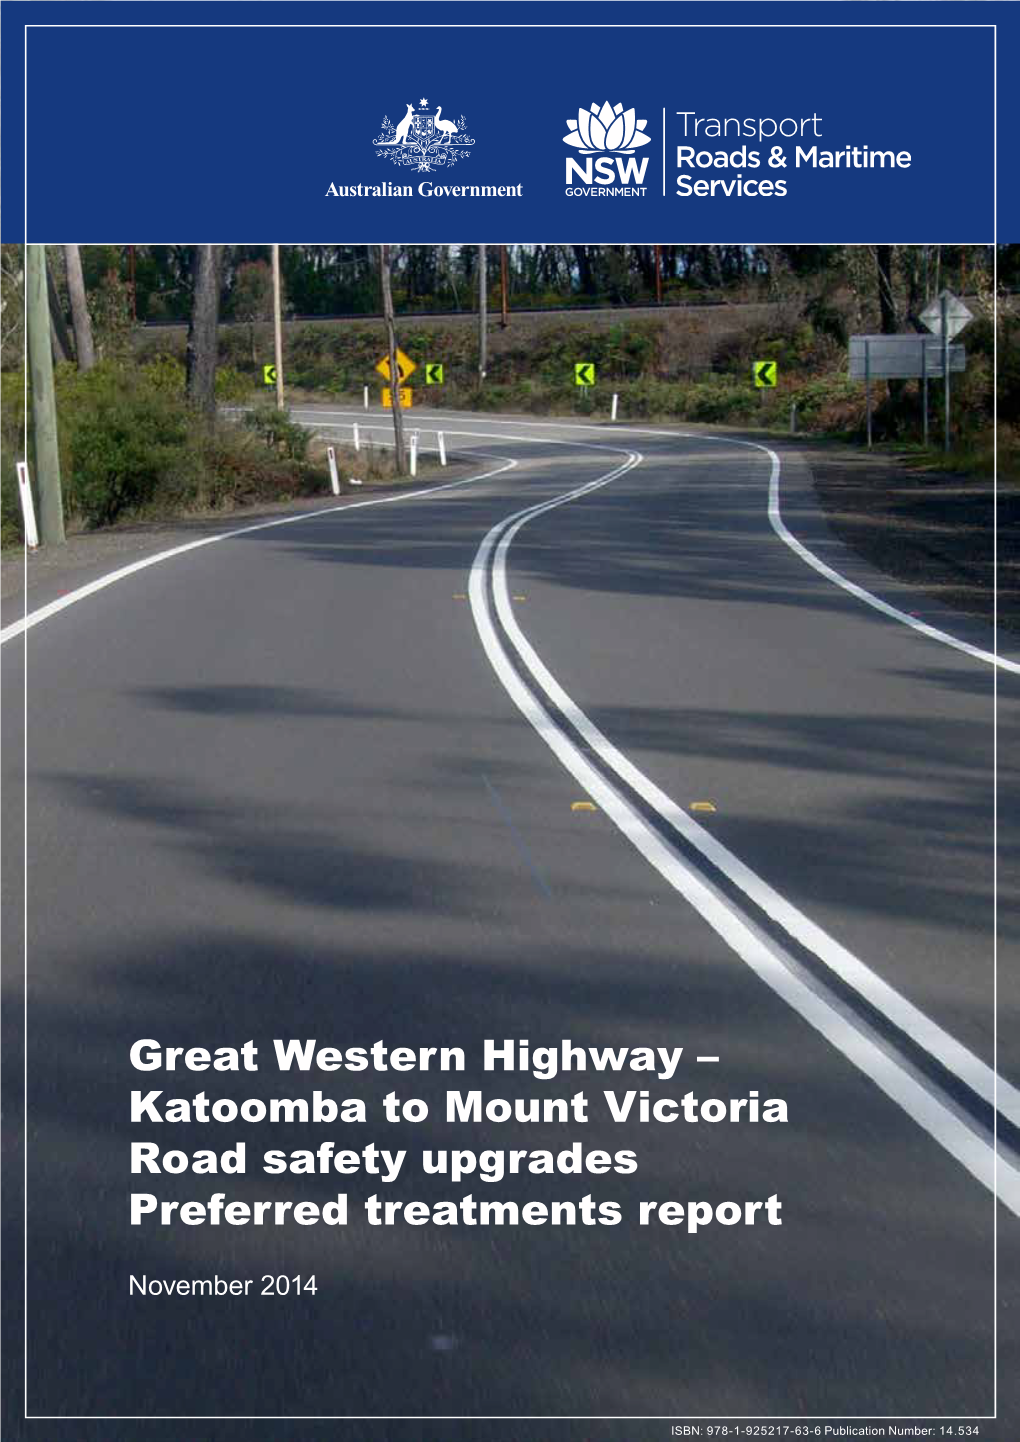 Great Western Highway – Katoomba to Mount Victoria Road Safety Upgrades Preferred Treatments Report